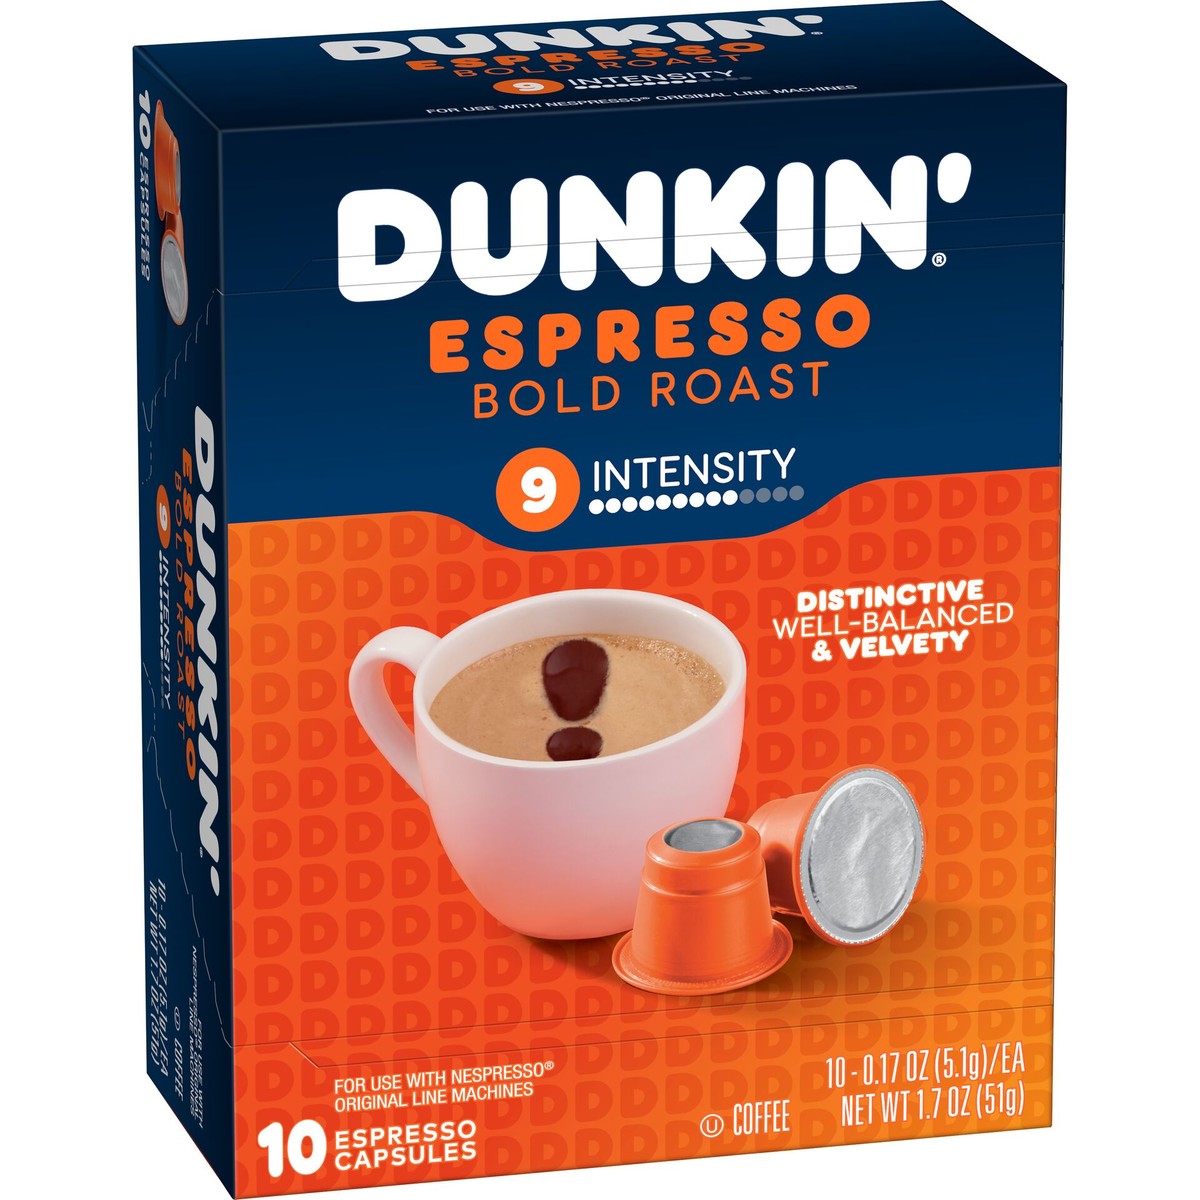 Dunkin'® Espresso Bold Roast dark roast espresso capsules in an orange and blue box with an image of a white mug with brown coffee and bubbles in the shape of an exclamation mark and two orange capsule pods on it